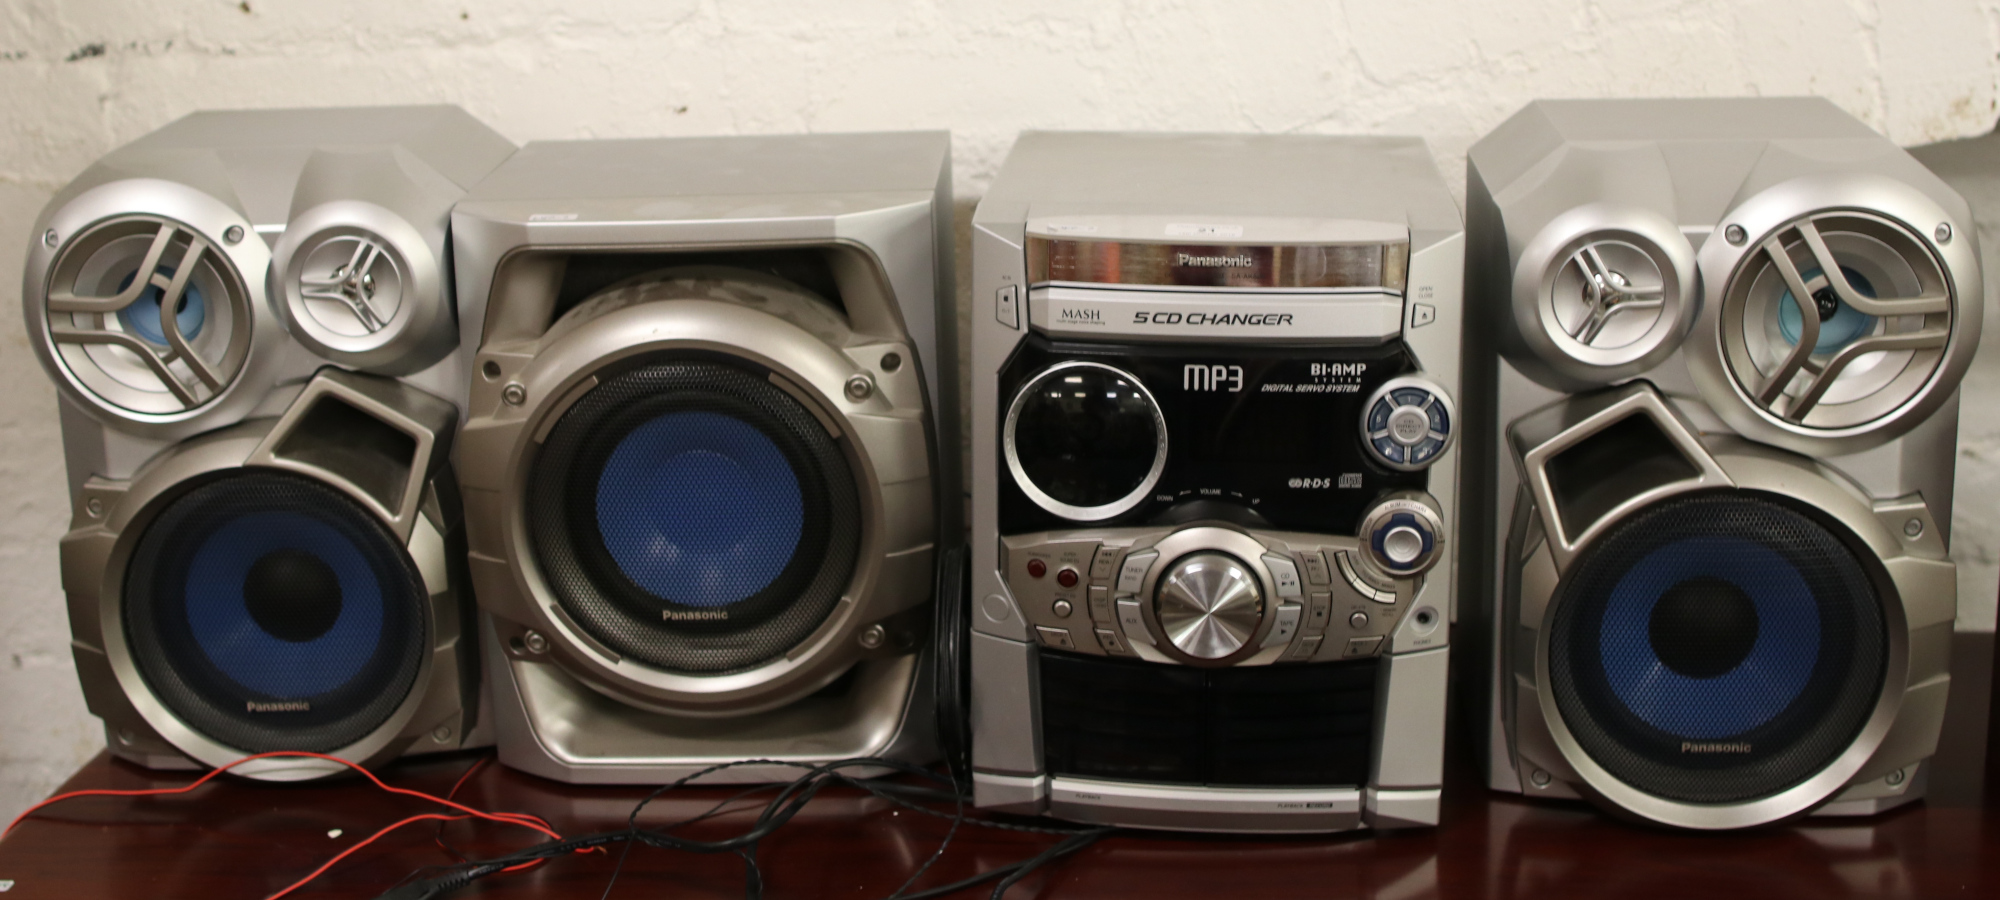 A Panasonic C.D stereo system with sub woofer and two speakers.